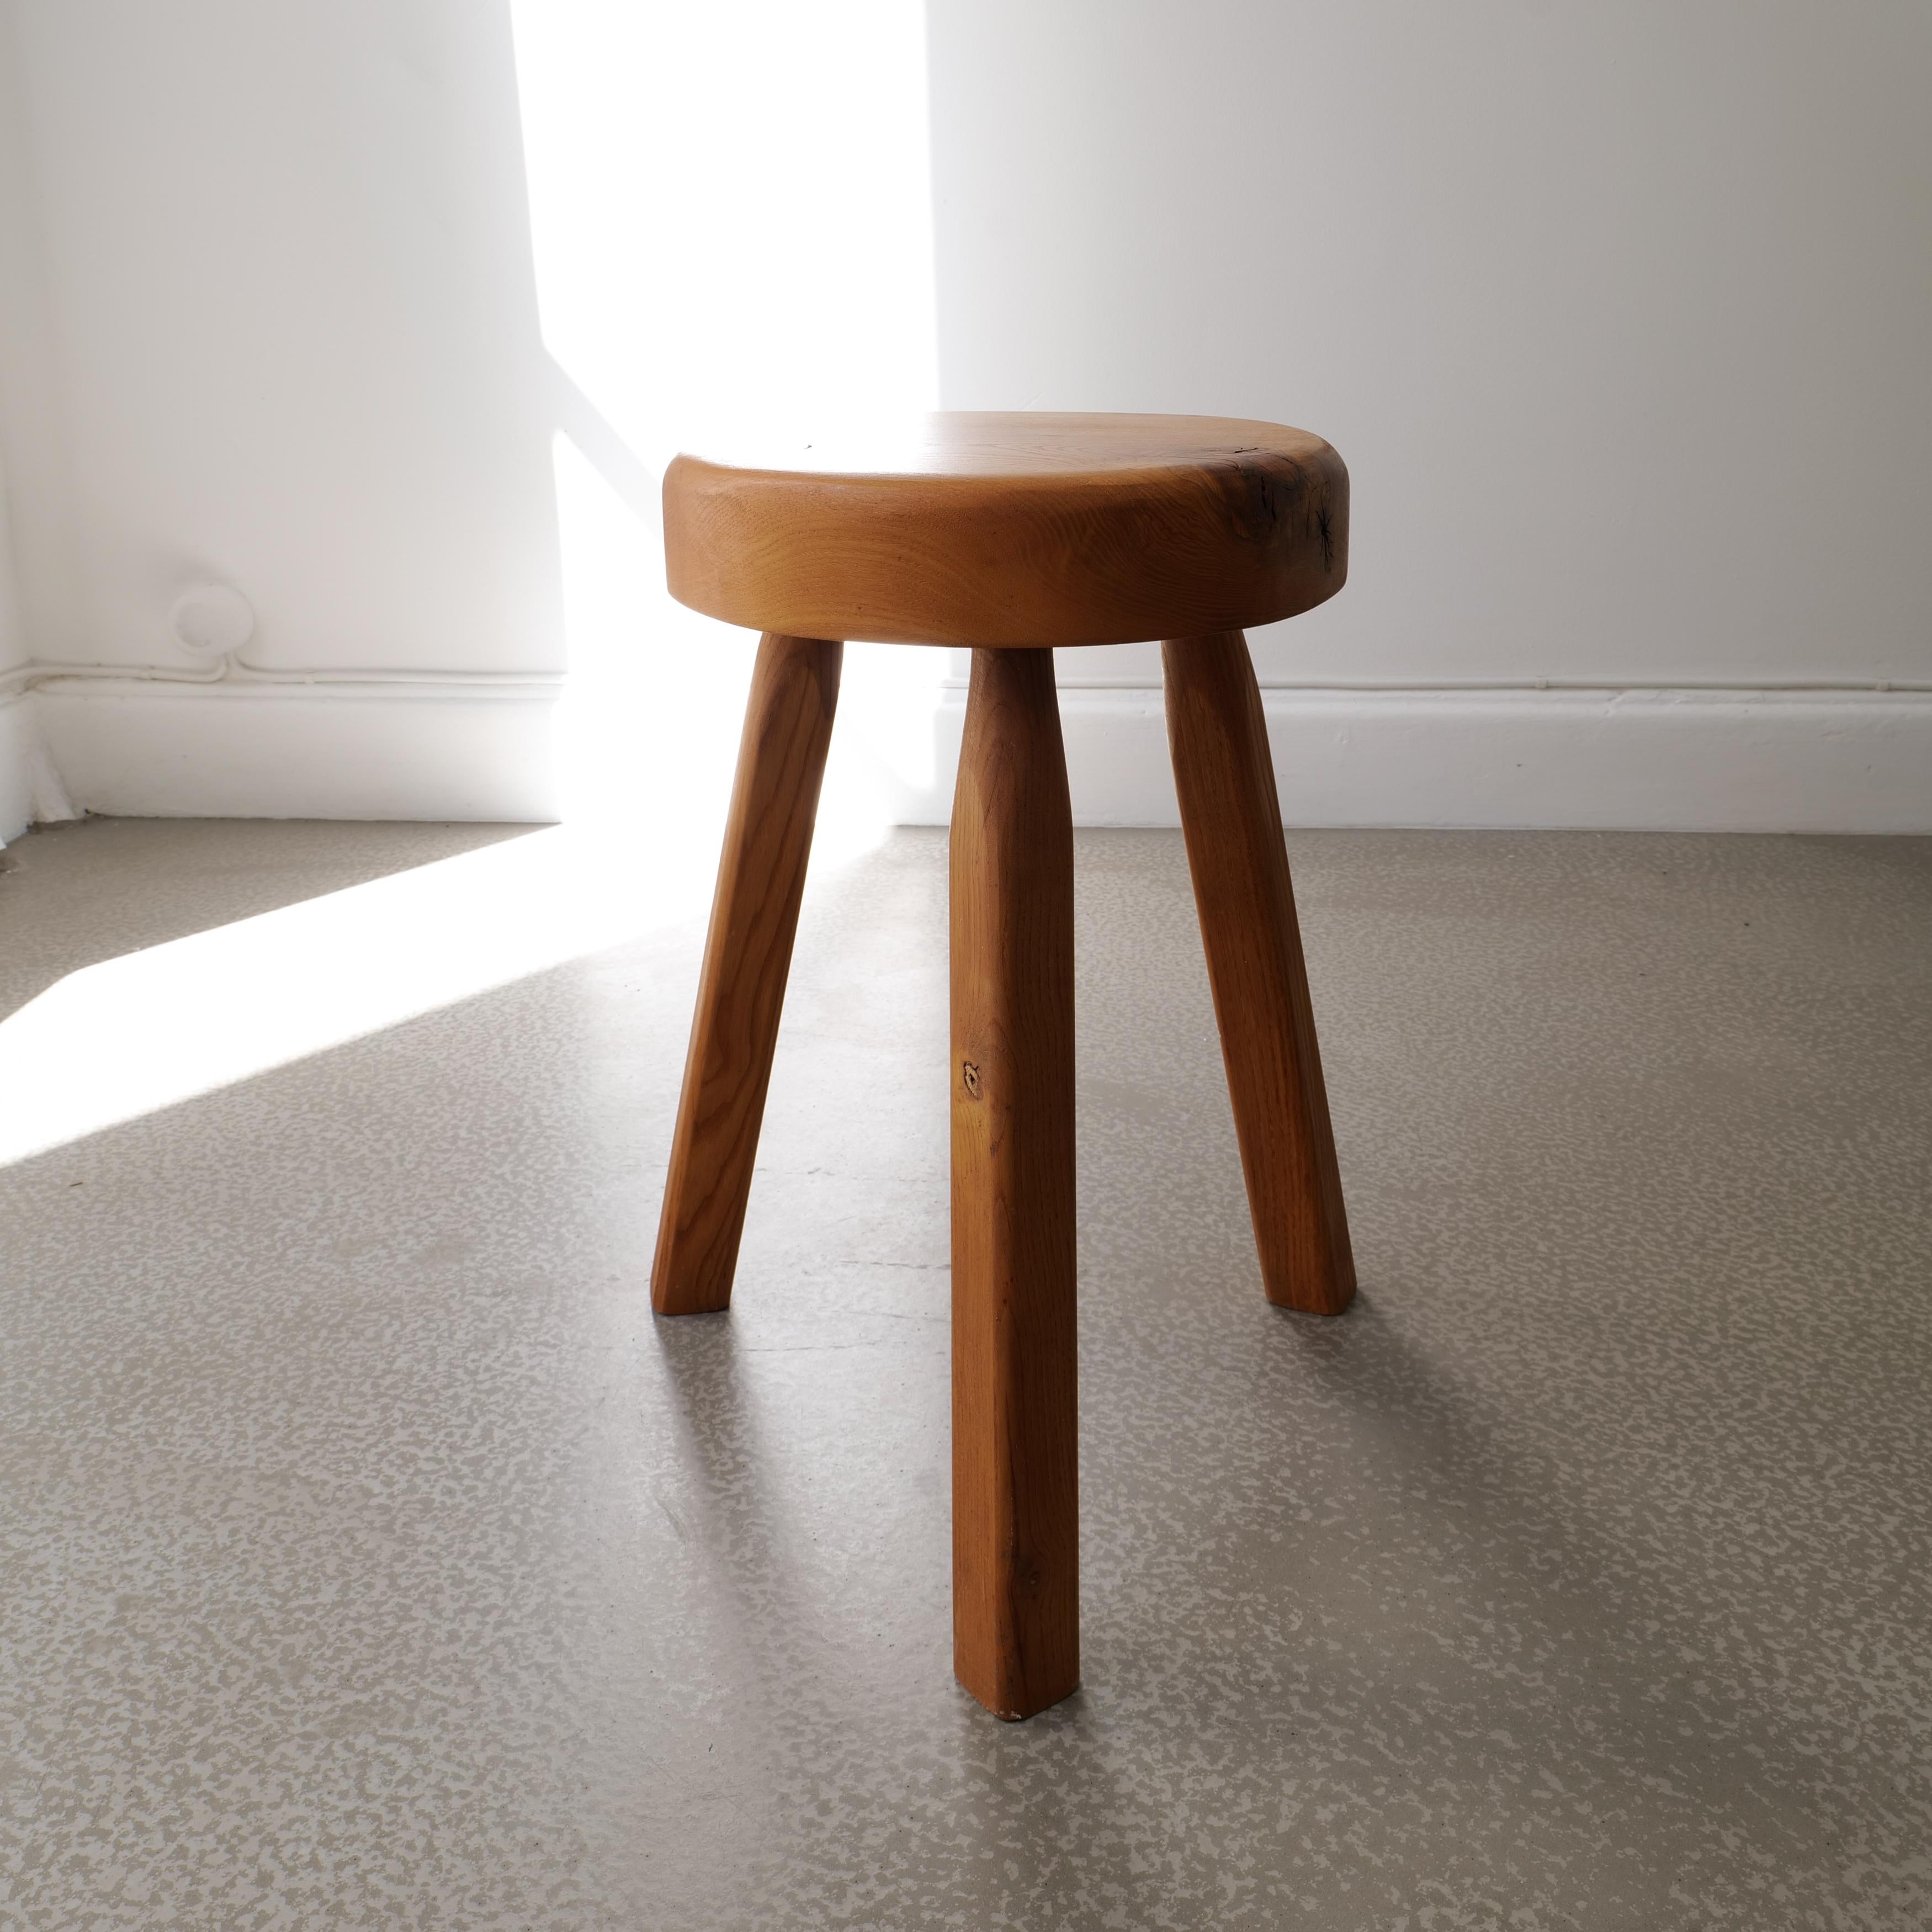 A beautifully crafted Ash wood stool with a sculptural and organic shaped seat and lovely wood knots adding character and warmth.  The legs are tall and statuesque with square smooth edges and the stool is solid, heavy and stable with minimal marks